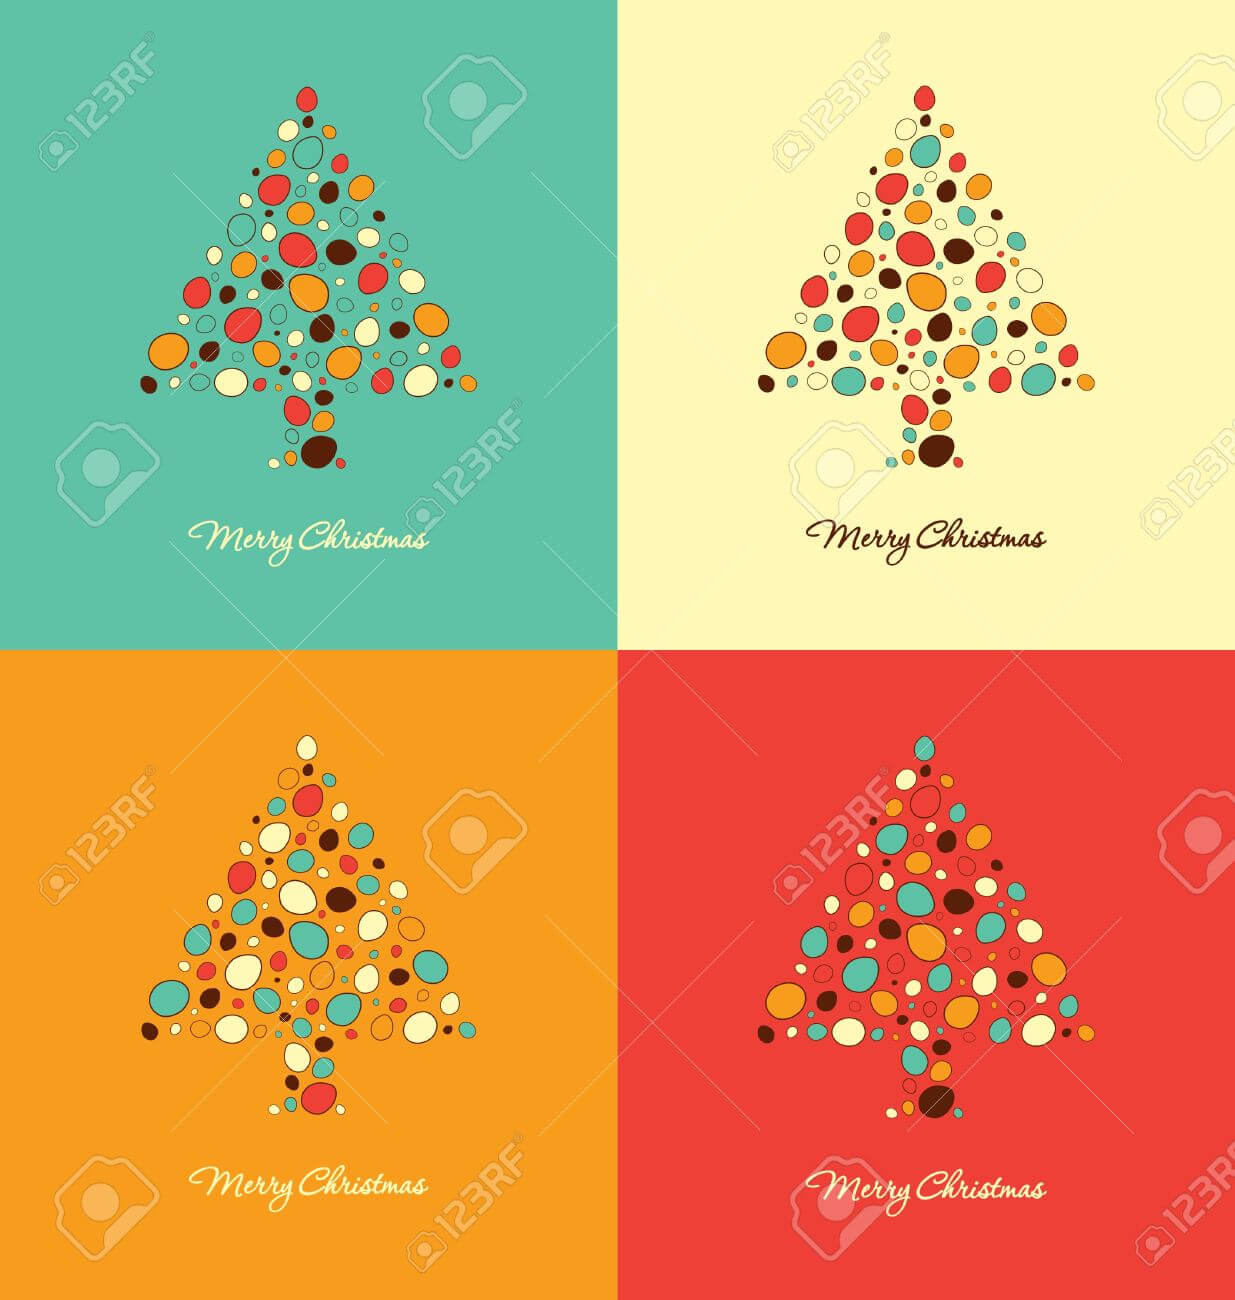 042 Christmas Card Design Templates Template Ideas Unusual Pertaining To Blank Christmas Card Templates Free